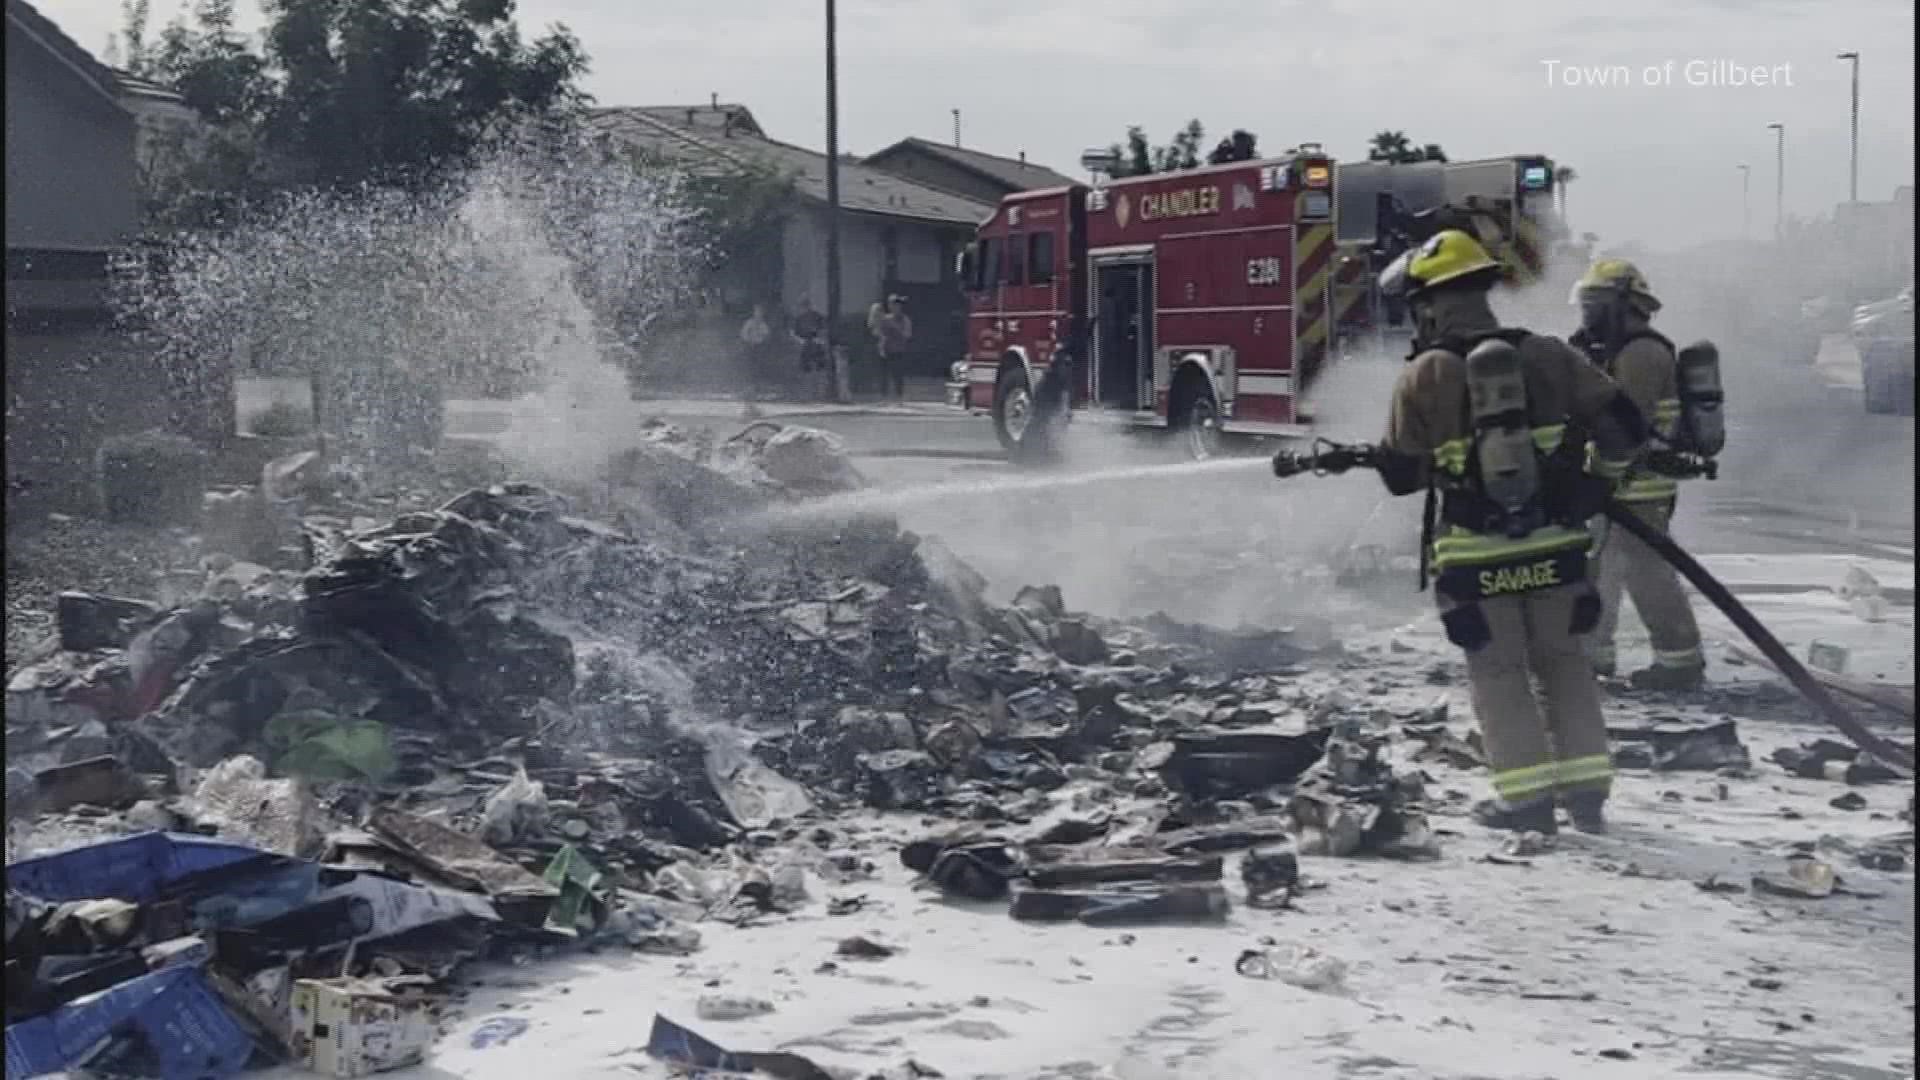 Hazardous waste like household cleaners, batteries, paint and more are what the town says has caused four garbage truck fires so far in 2022.